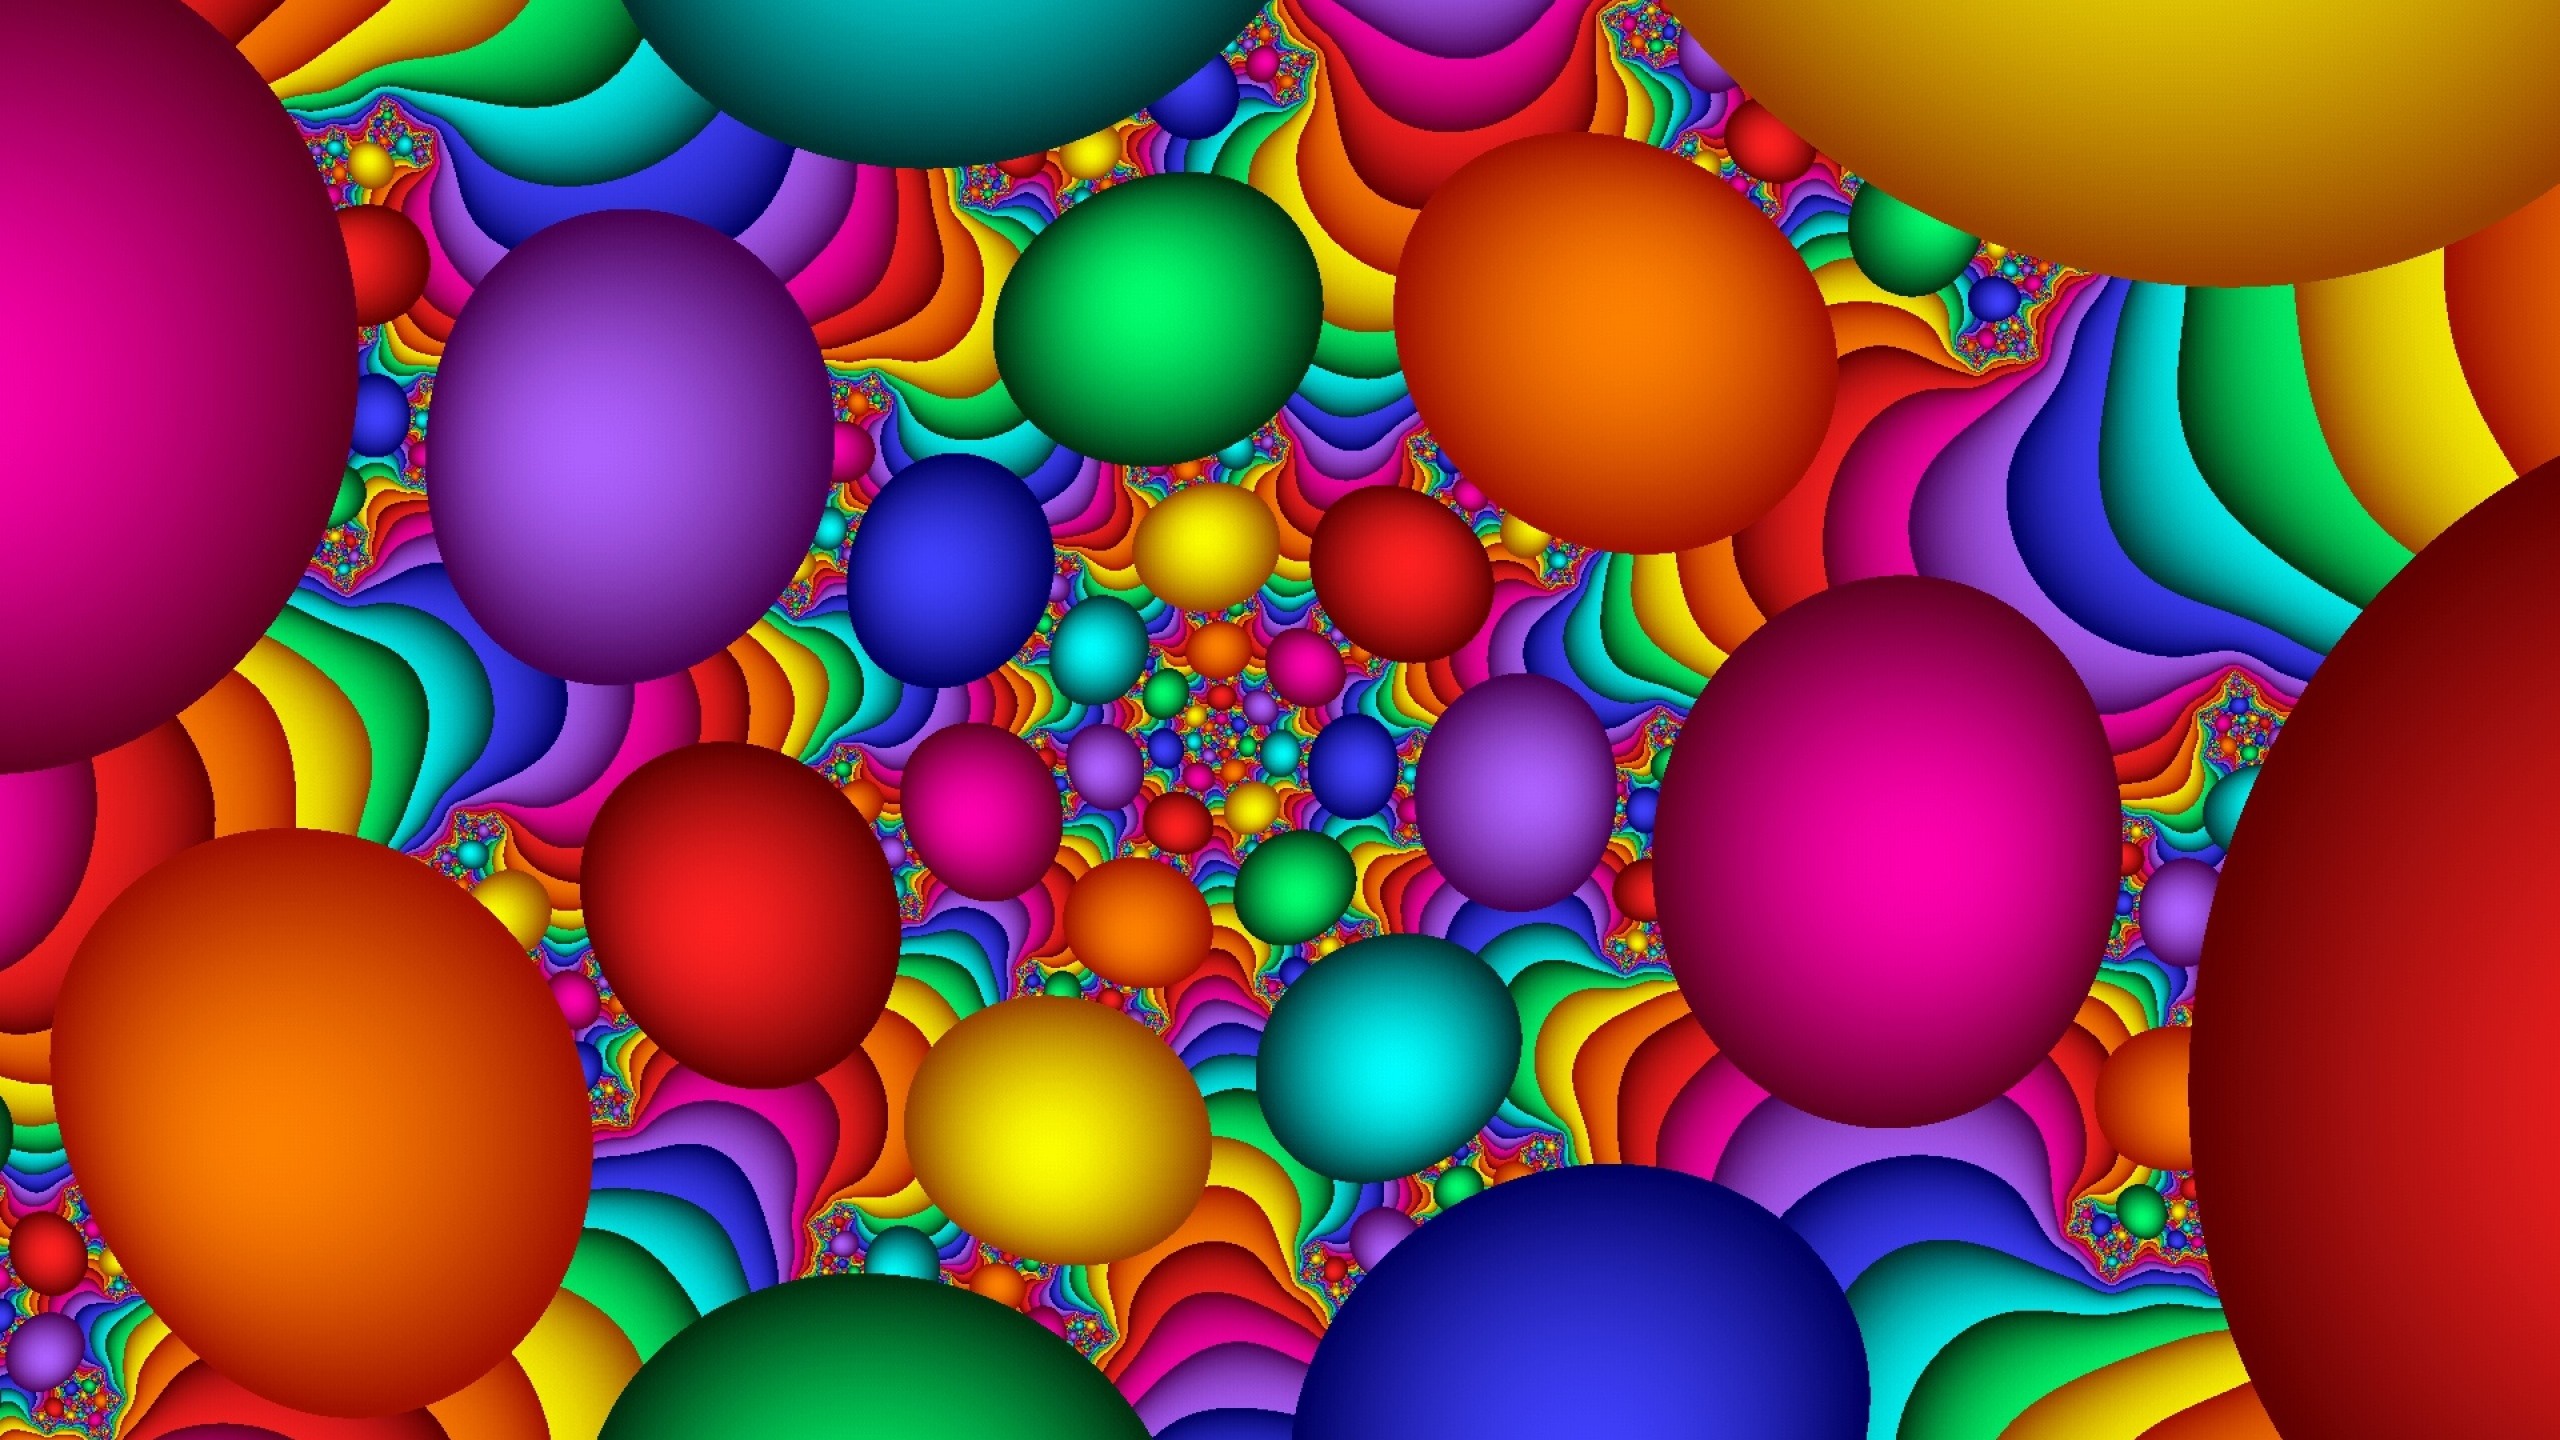 2560x1440  Wallpaper balloons, colorful, background, bright